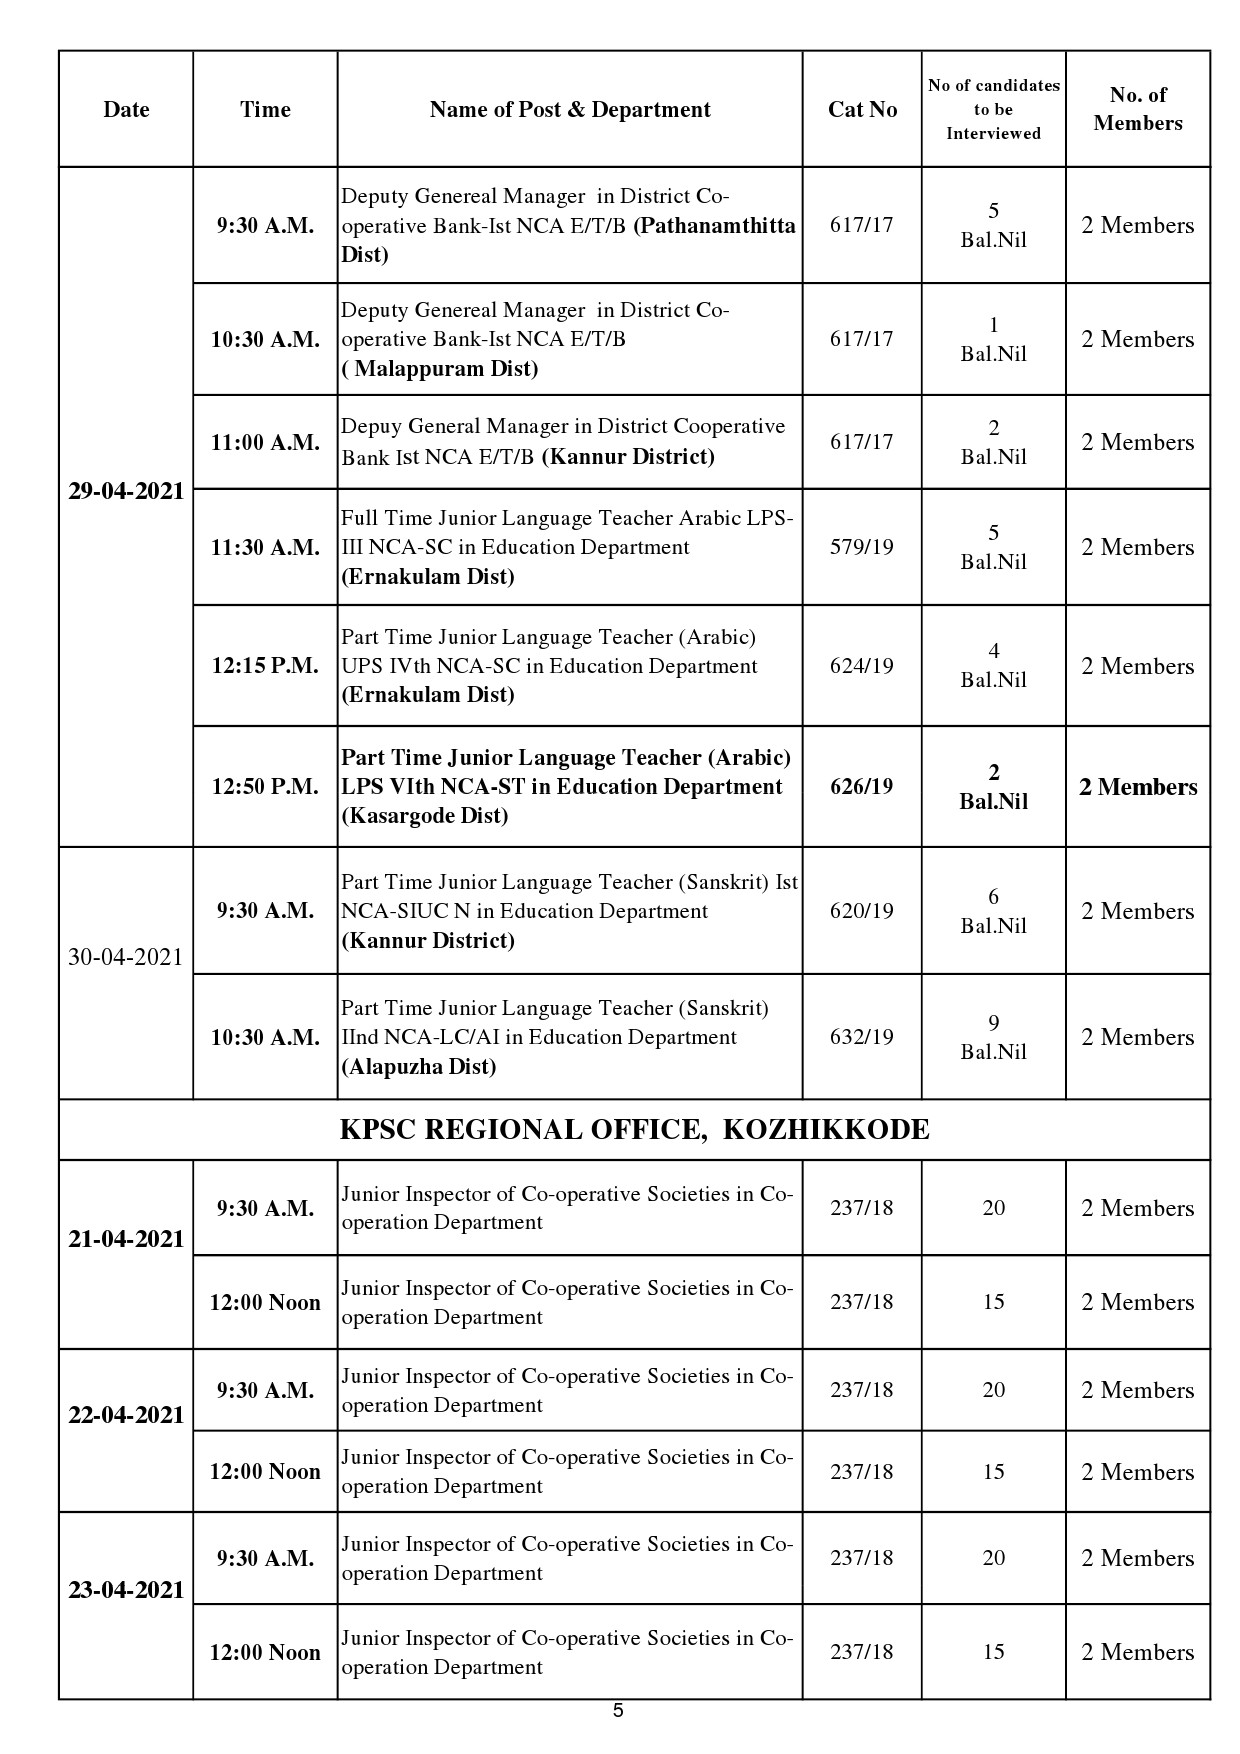 REVISED INTERVIEW PROGRAMME FOR THE MONTH OF APRIL 2021 - Notification Image 5